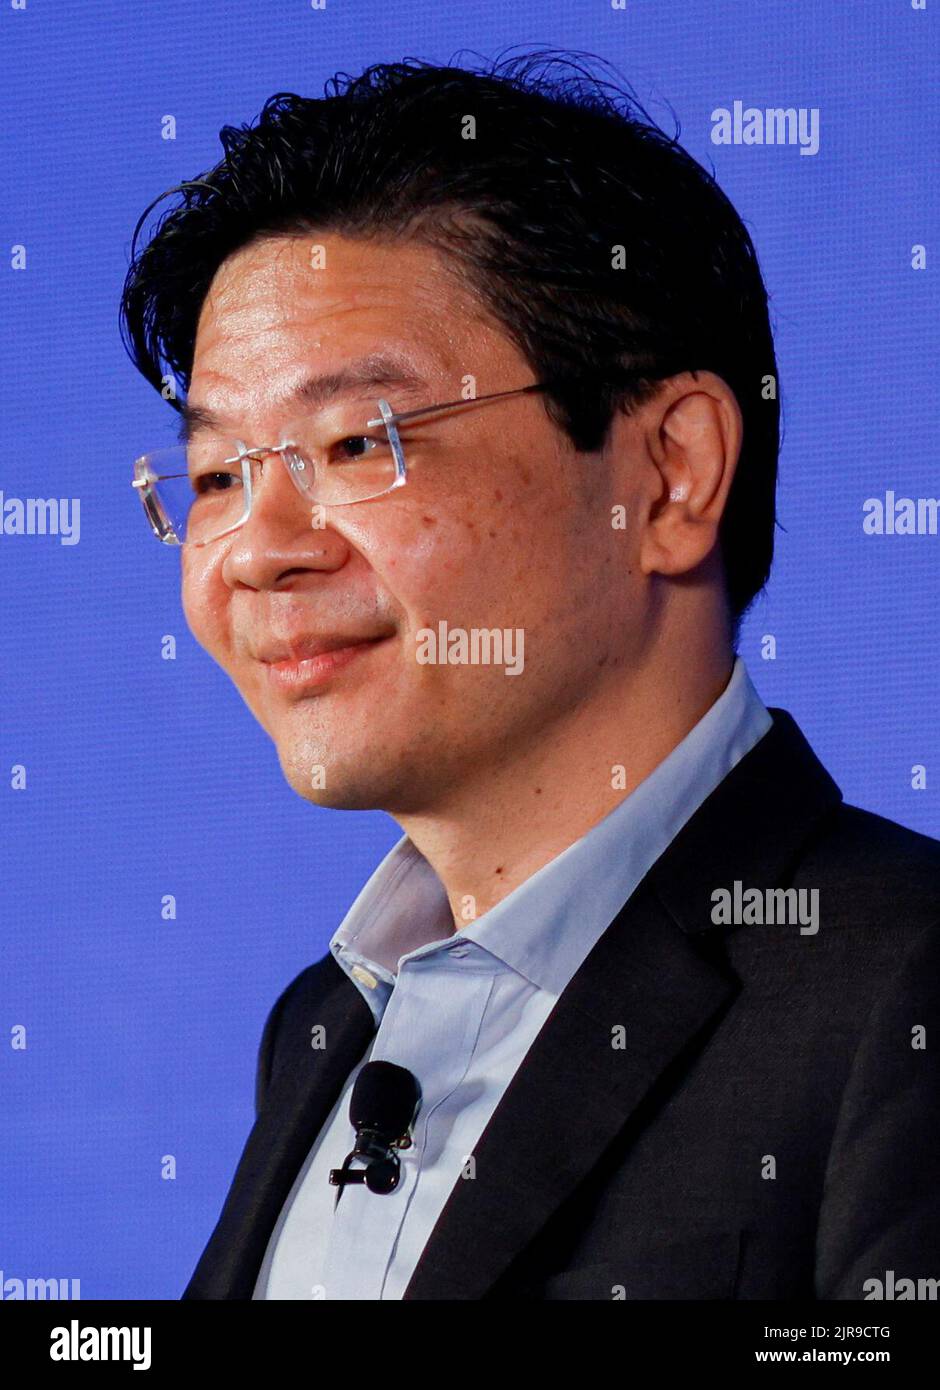 Singapore's Deputy Prime Minister and Minister for Finance Lawrence Wong attends 'Google for Singapore', an event celebrating the company's 15th year in the country, at Google's office, in Singapore August 23, 2022. REUTERS/Edgar Su Stock Photo